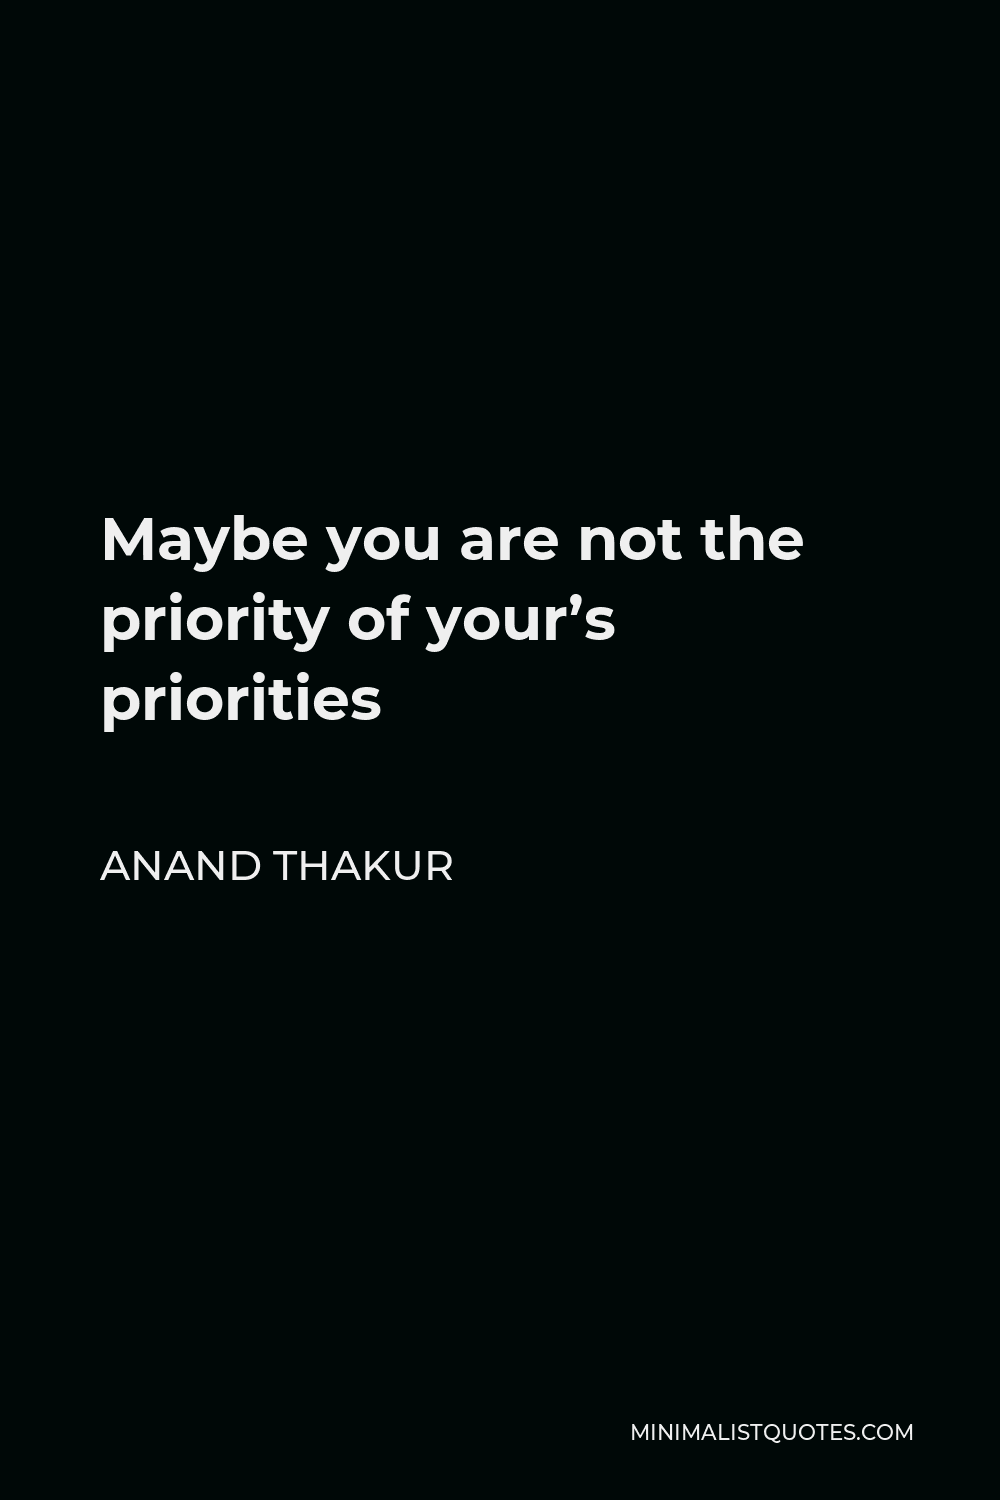 Anand Thakur Quote - Maybe you are not the priority of your’s priorities